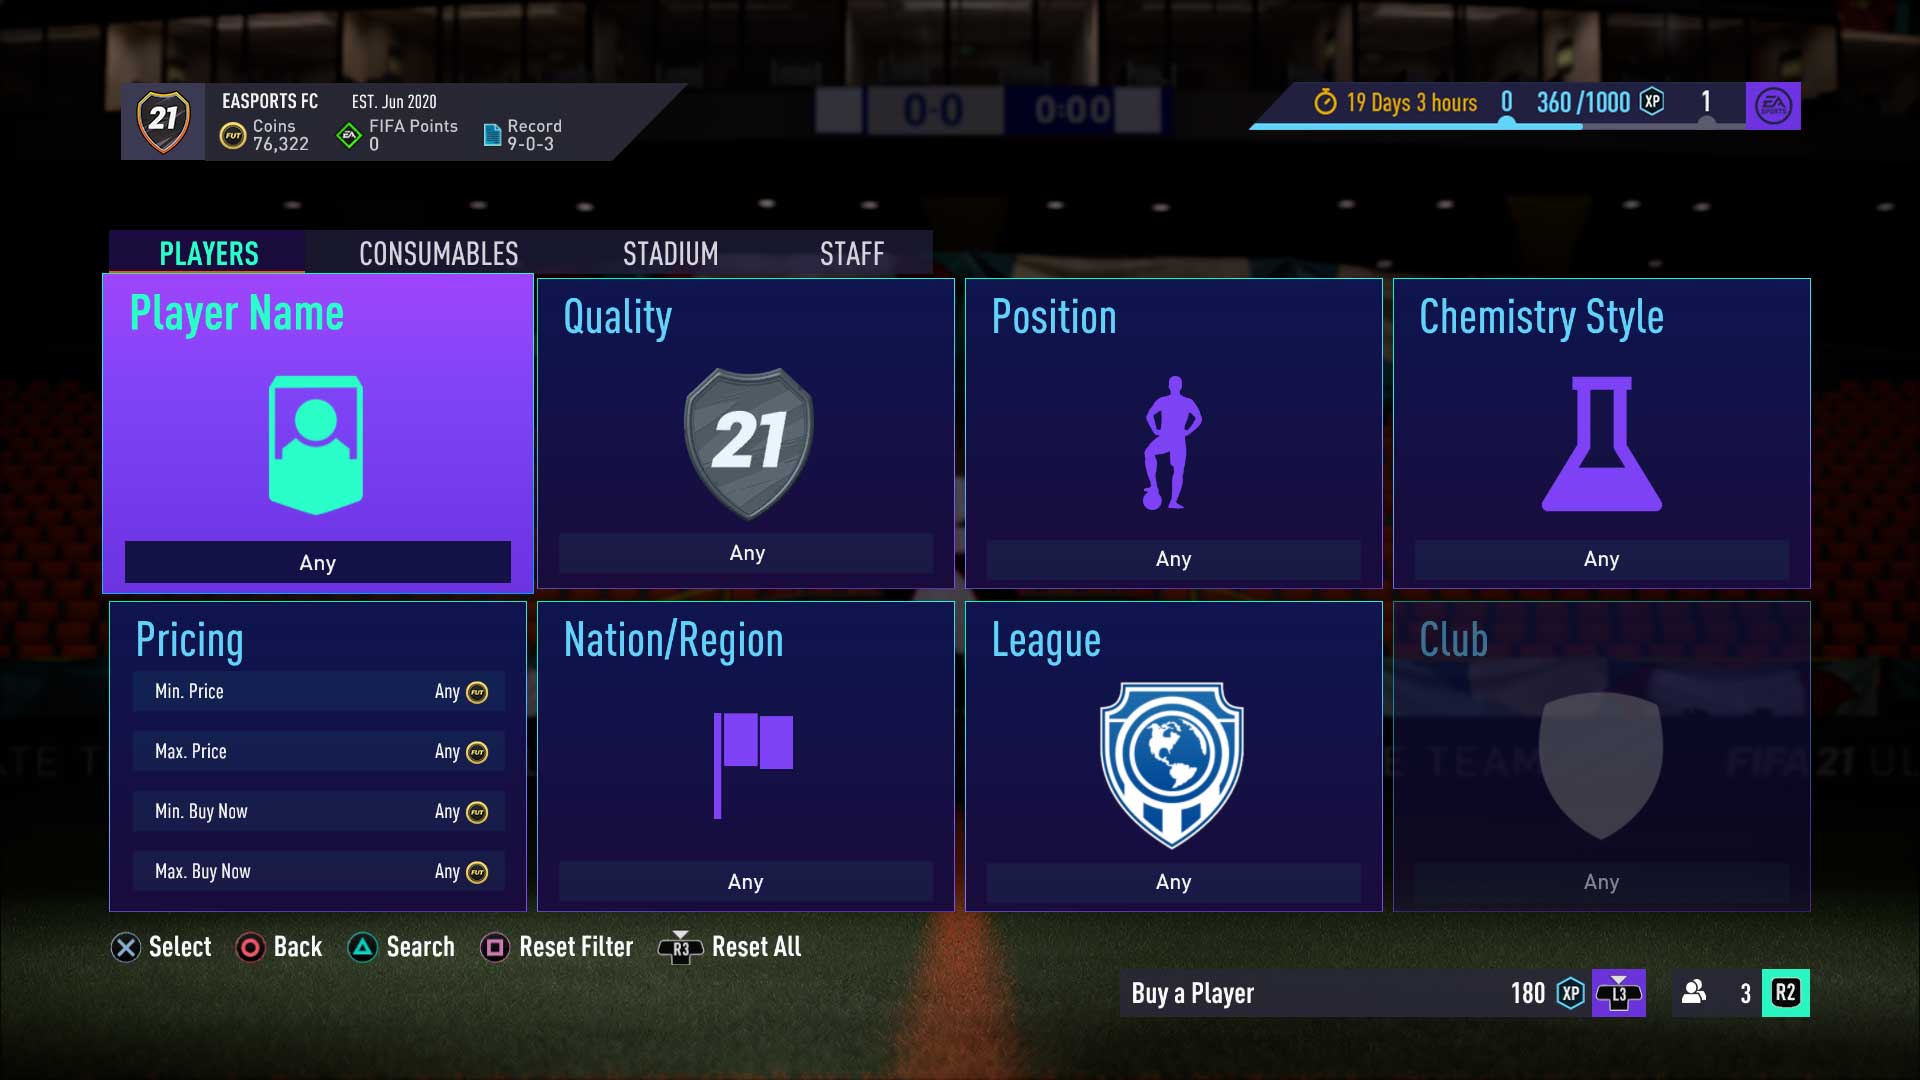 FIFA 21 WEB APP IS HERE!! MY 6x ULTIMATE TEAM STARTER PACKS + TIPS